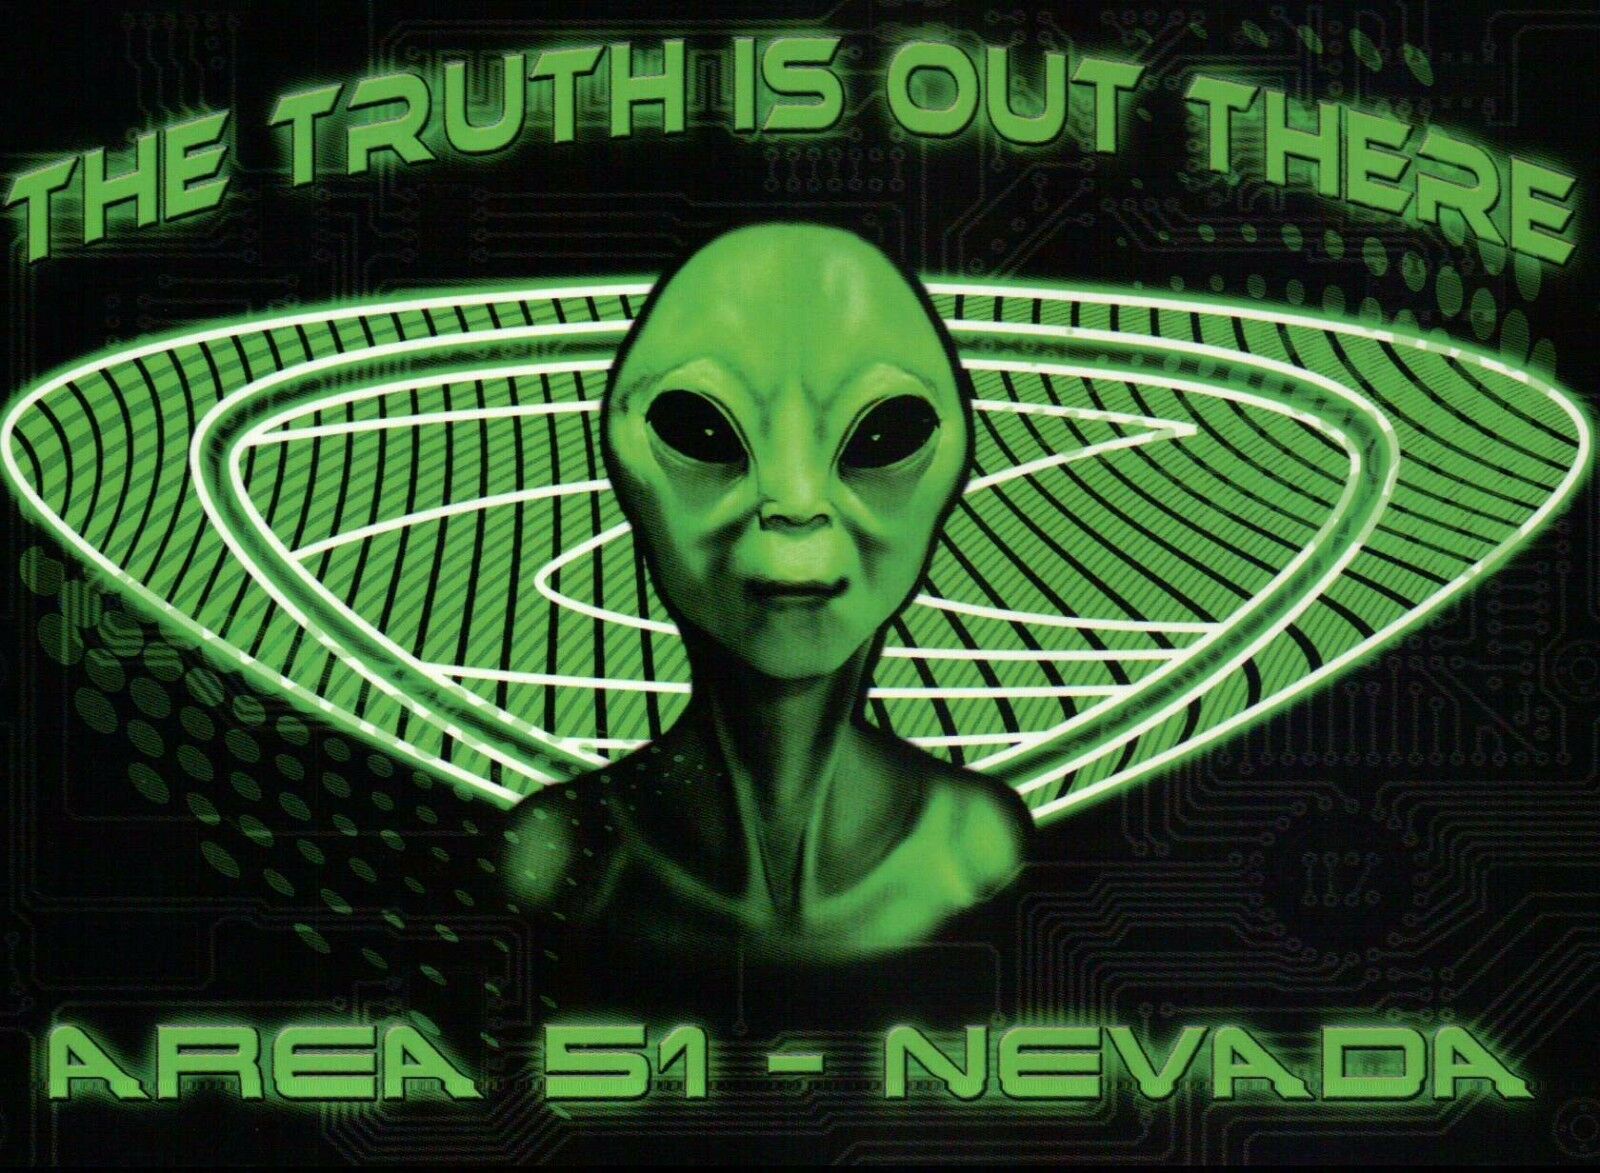 Area 51 Nevada, The Truth Is Out There, Alien Little Green Men, Ufo --- Postcard